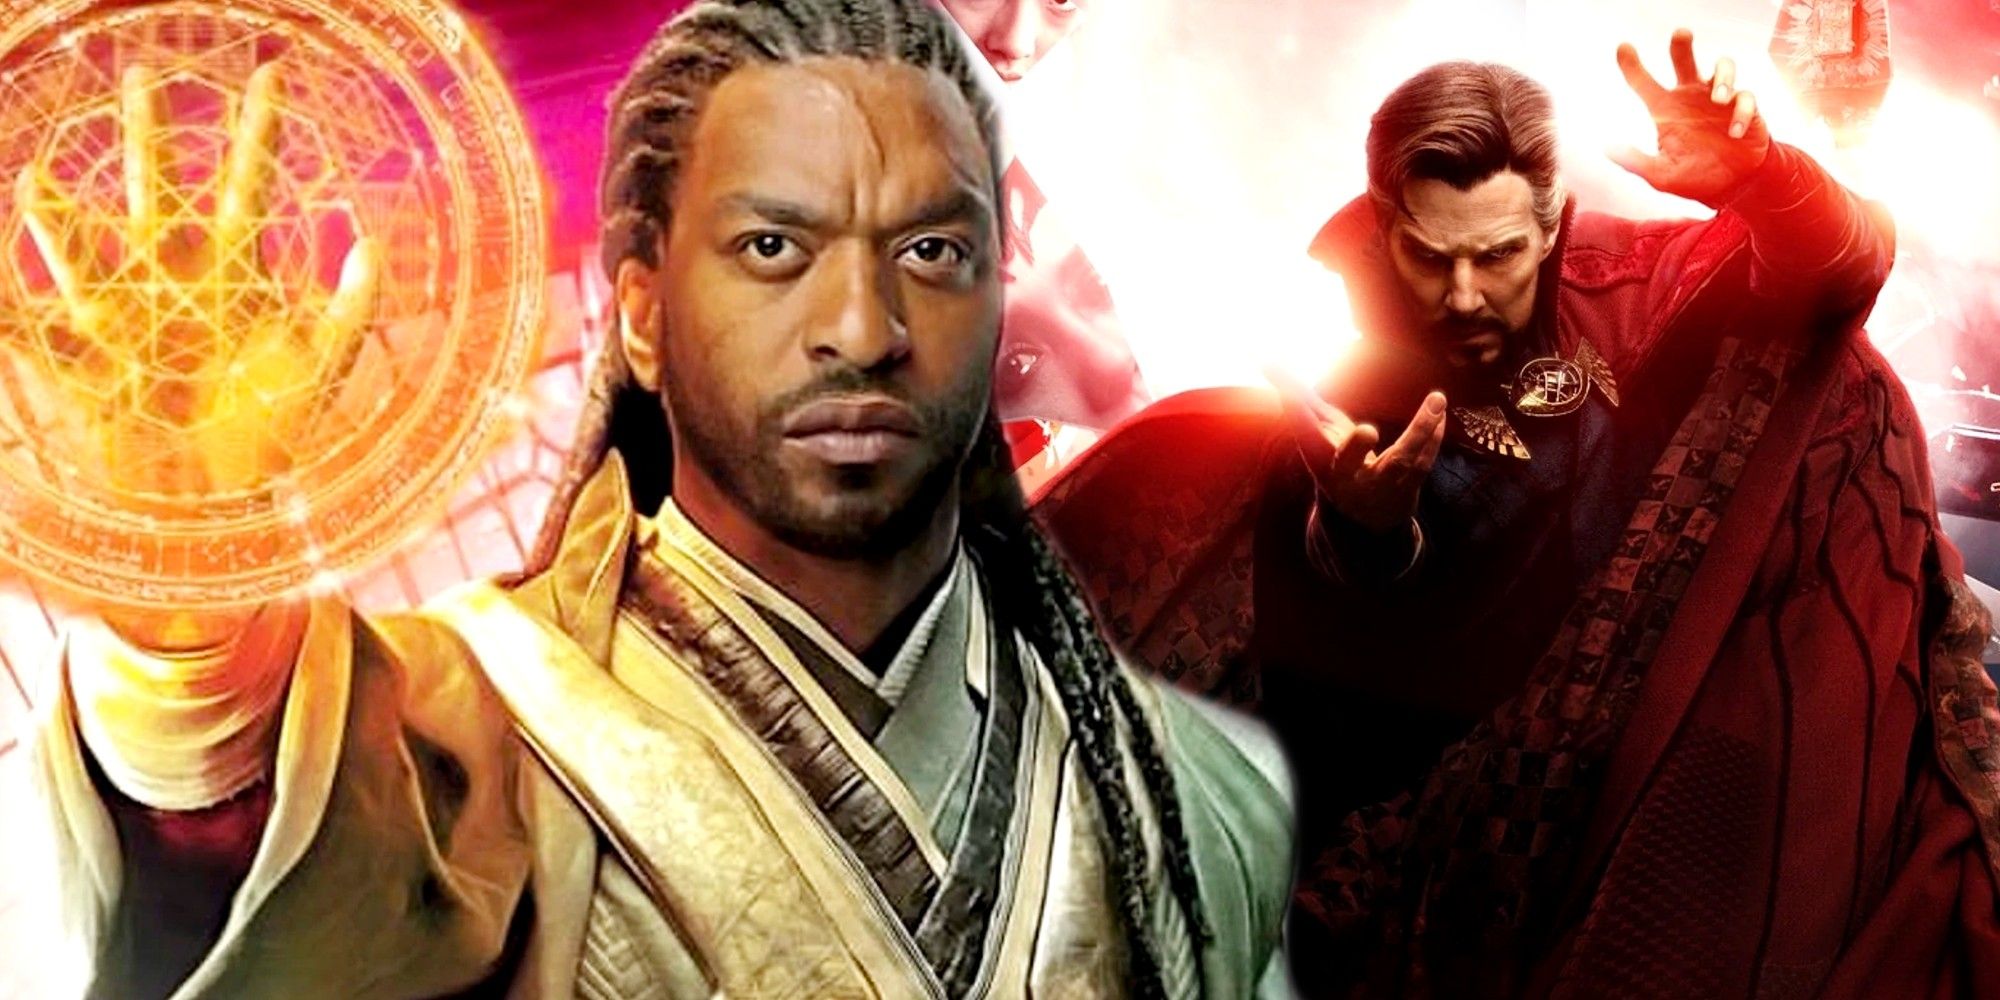 Doctor Strange In The Multiverse of Madness Benedict Cumberbatch as Doctor Strange and Chiwetel Ejiofor as Mordo